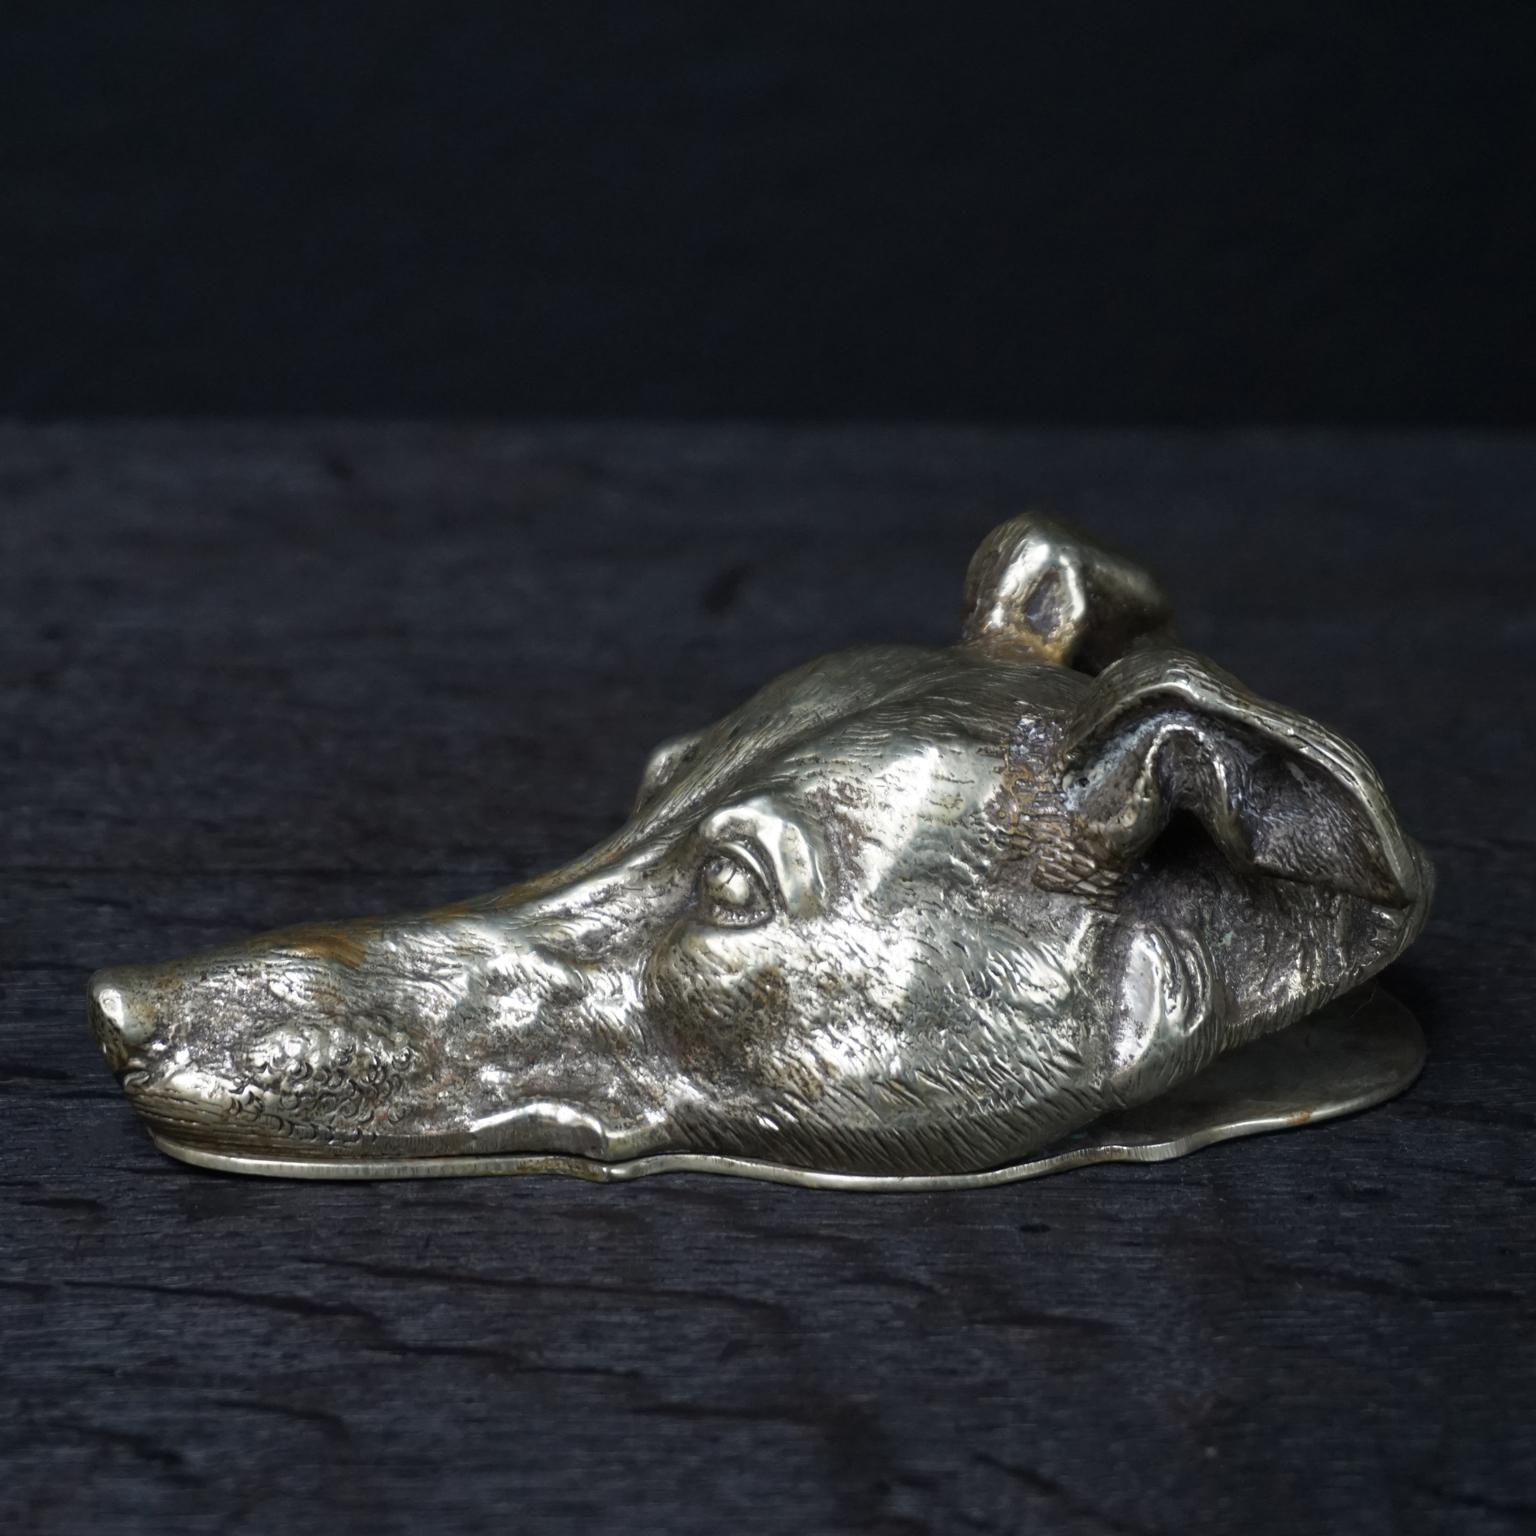 Wonderful Austrian Vienna solid cast bronze figural dog head of a Greyhound or Whippet dog with collar from the late 1800s, early 1900s
This heavy bronze cute dog can also be used as a paperweight.

This collectors item is in very good aged